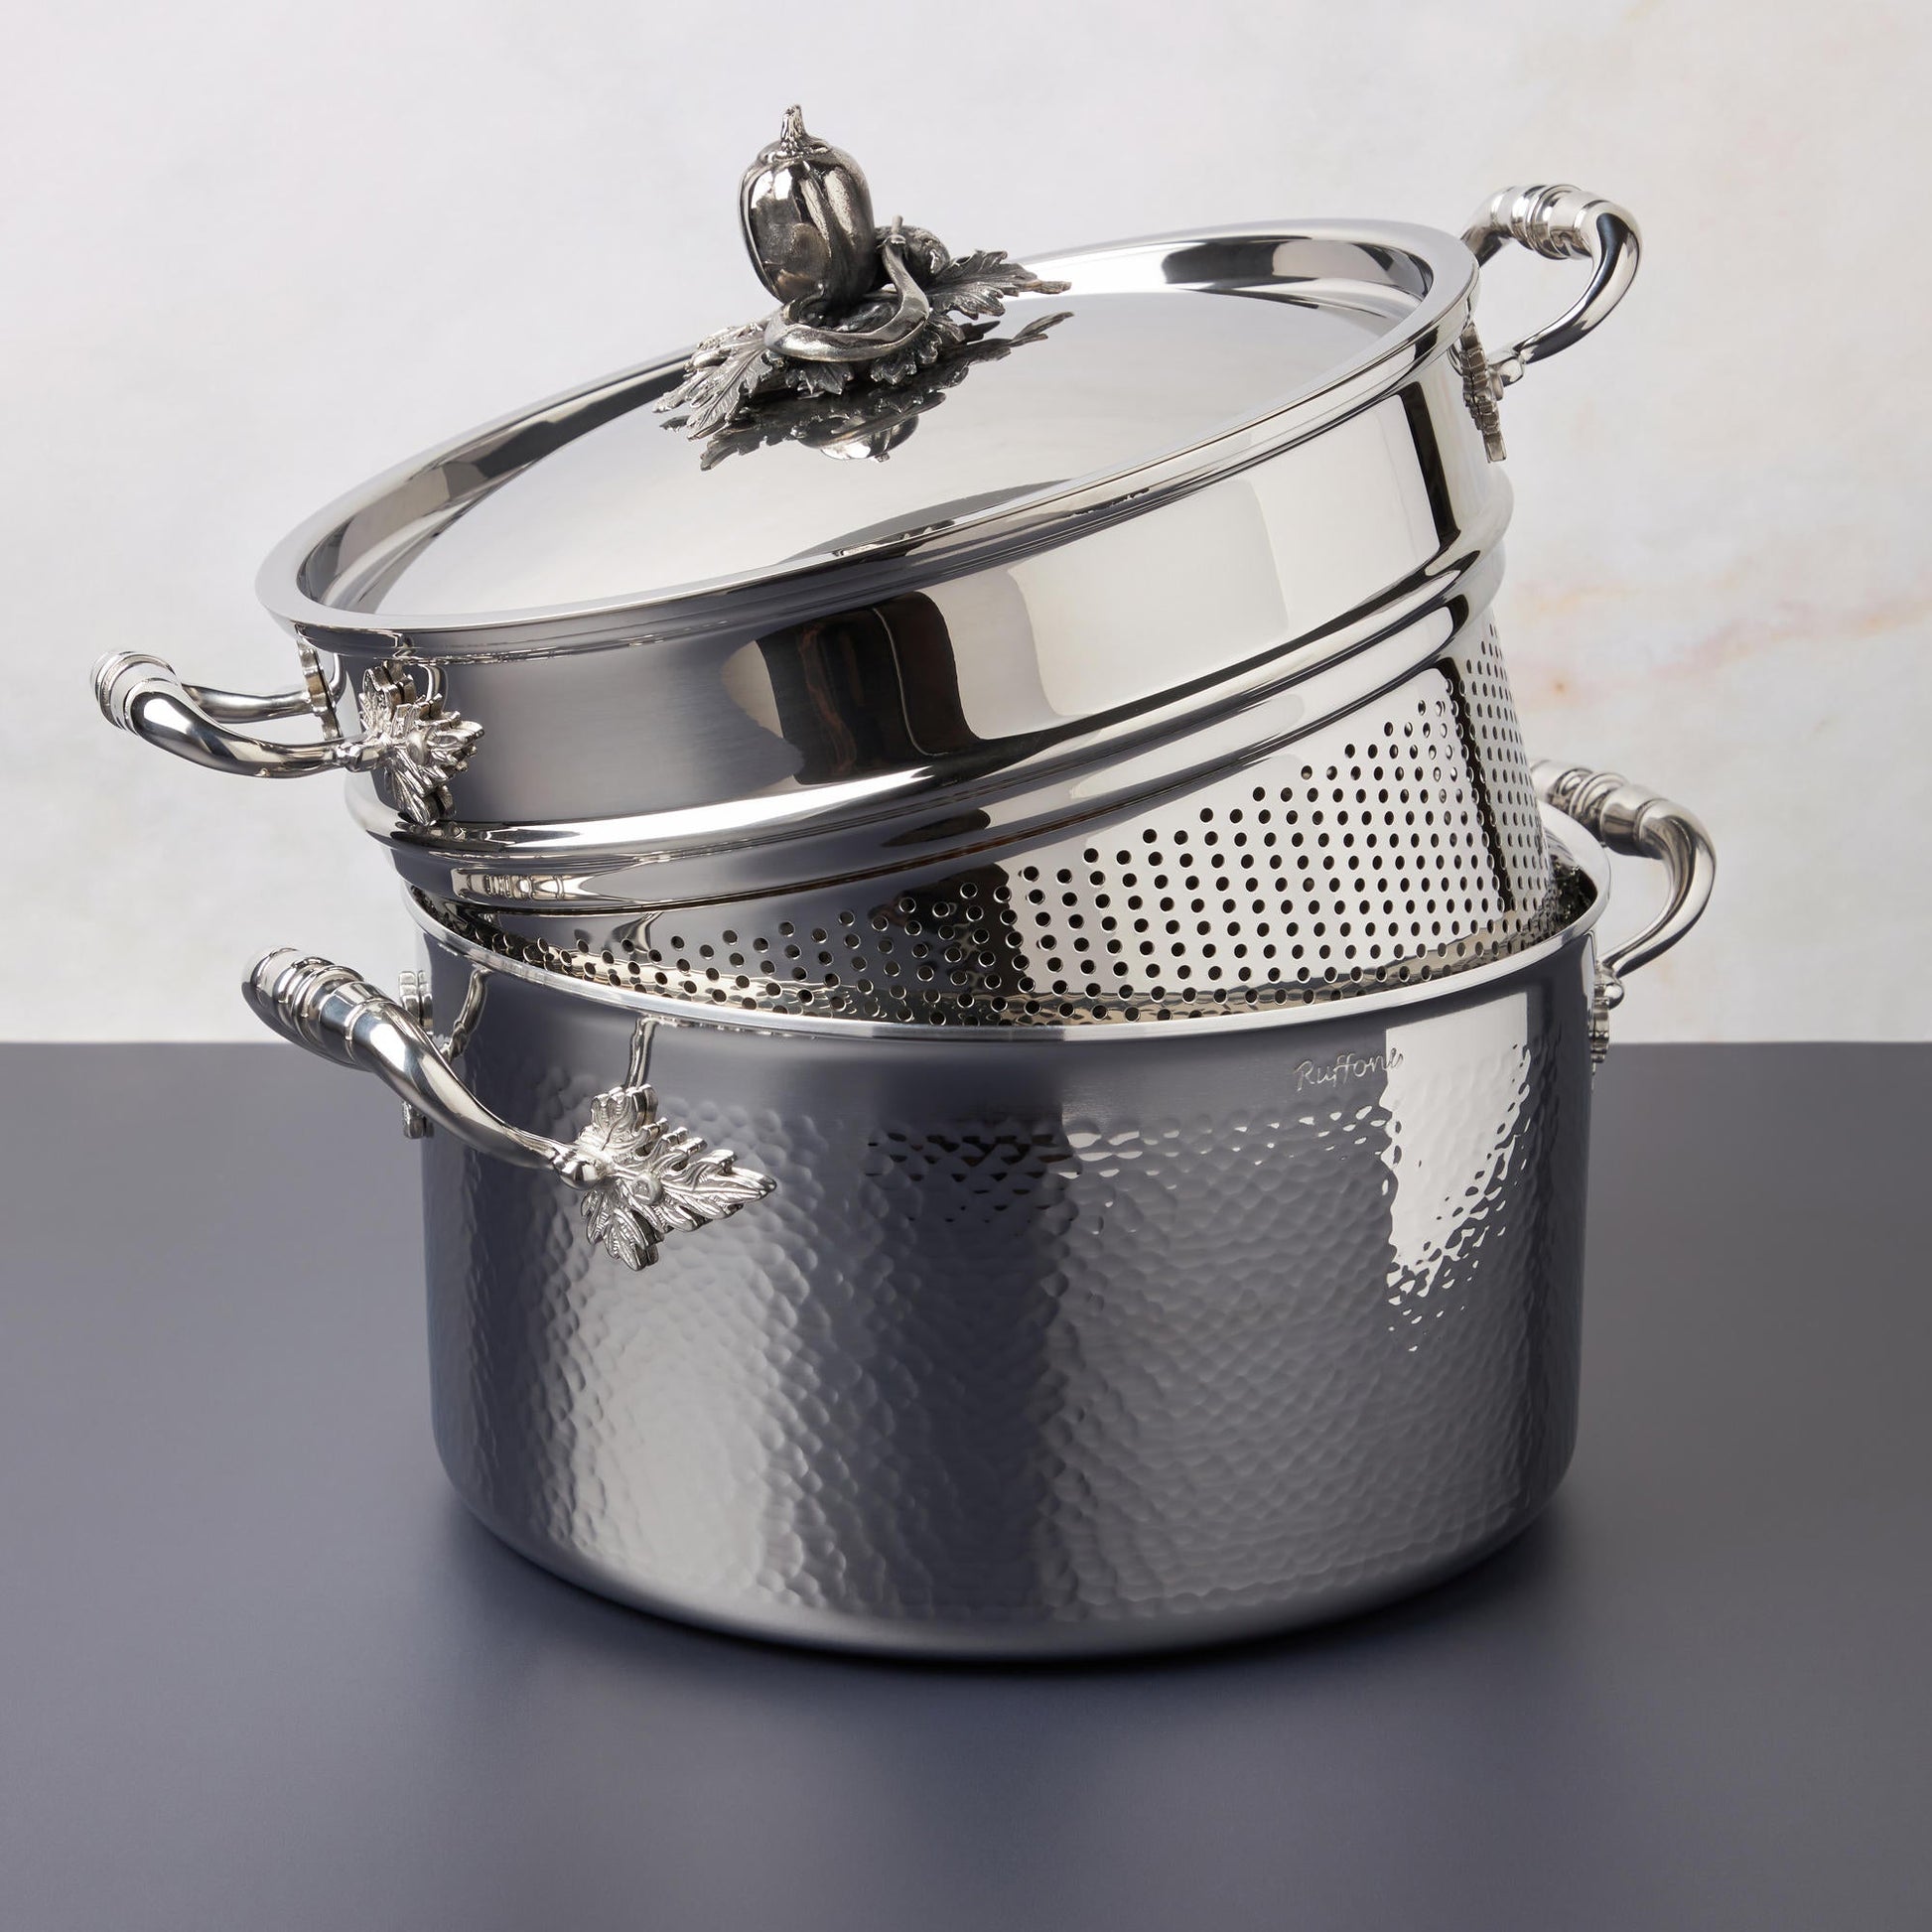 Opus Prima hammered clad stainless steel stockpot with decorated silver-plated lid knob finial from Ruffoni photographed with the matching pasta insert